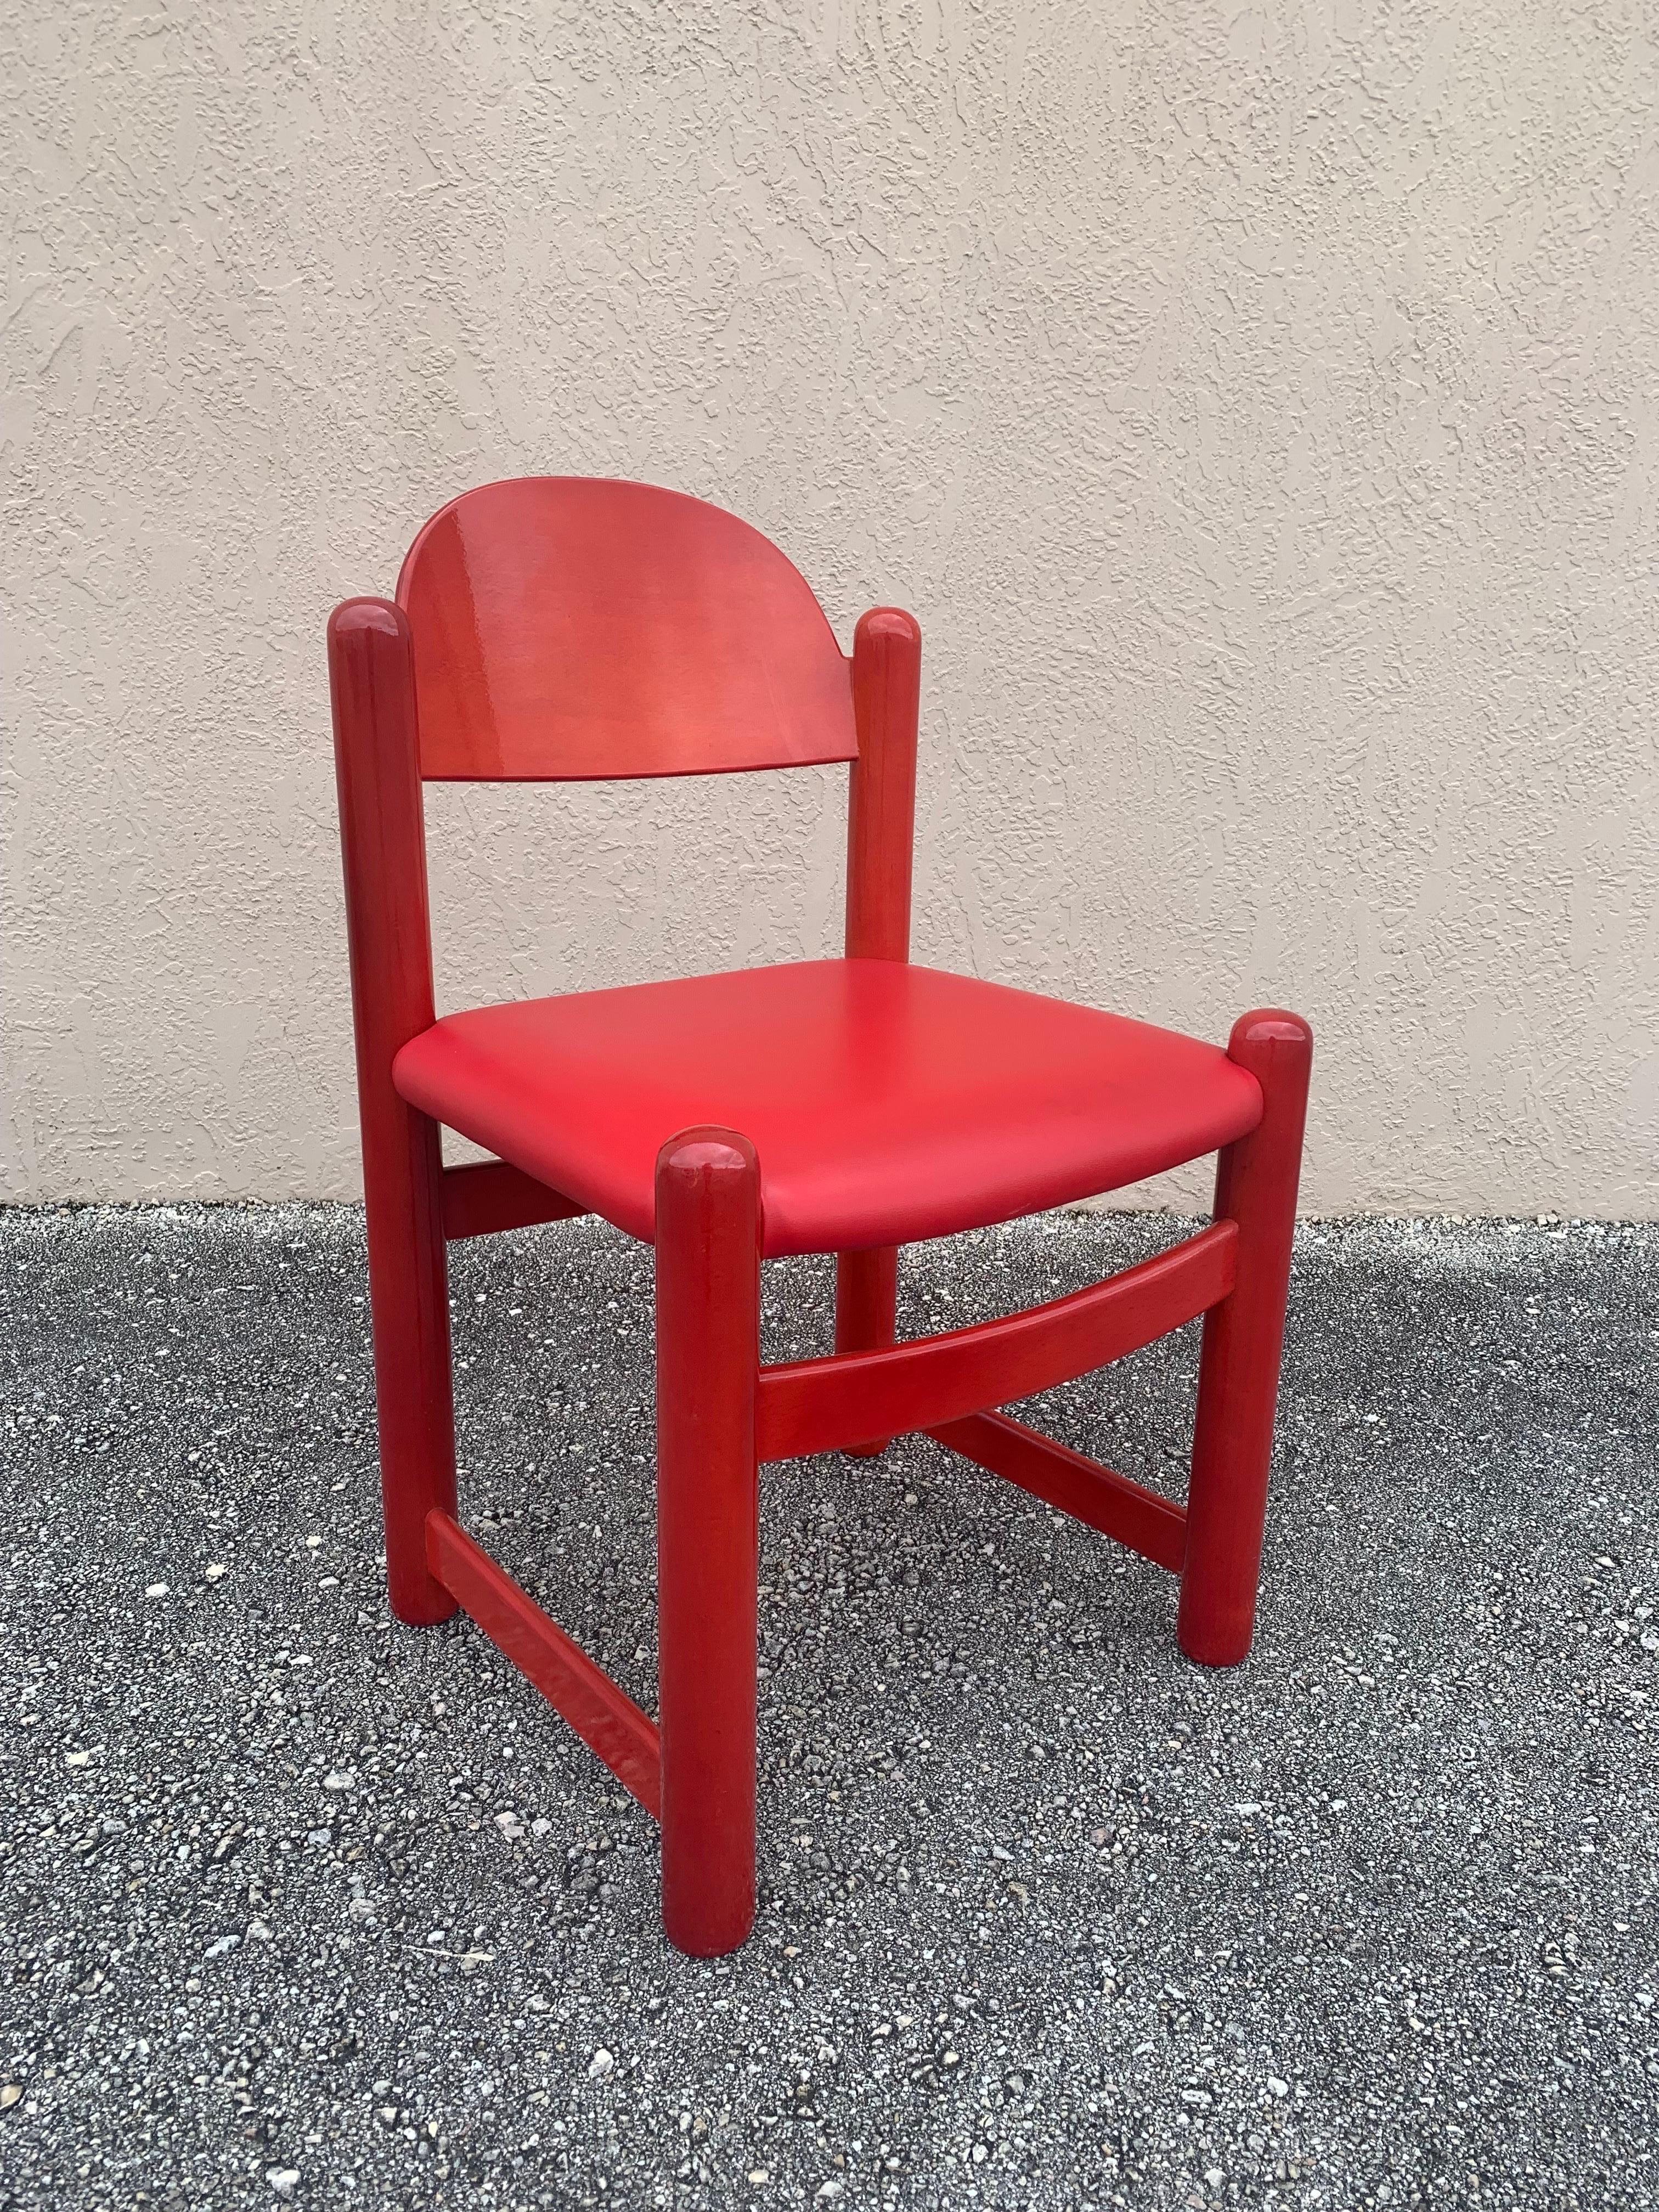 American Hank Loewenstein Oak and Leather Chairs in Red, 1970s For Sale